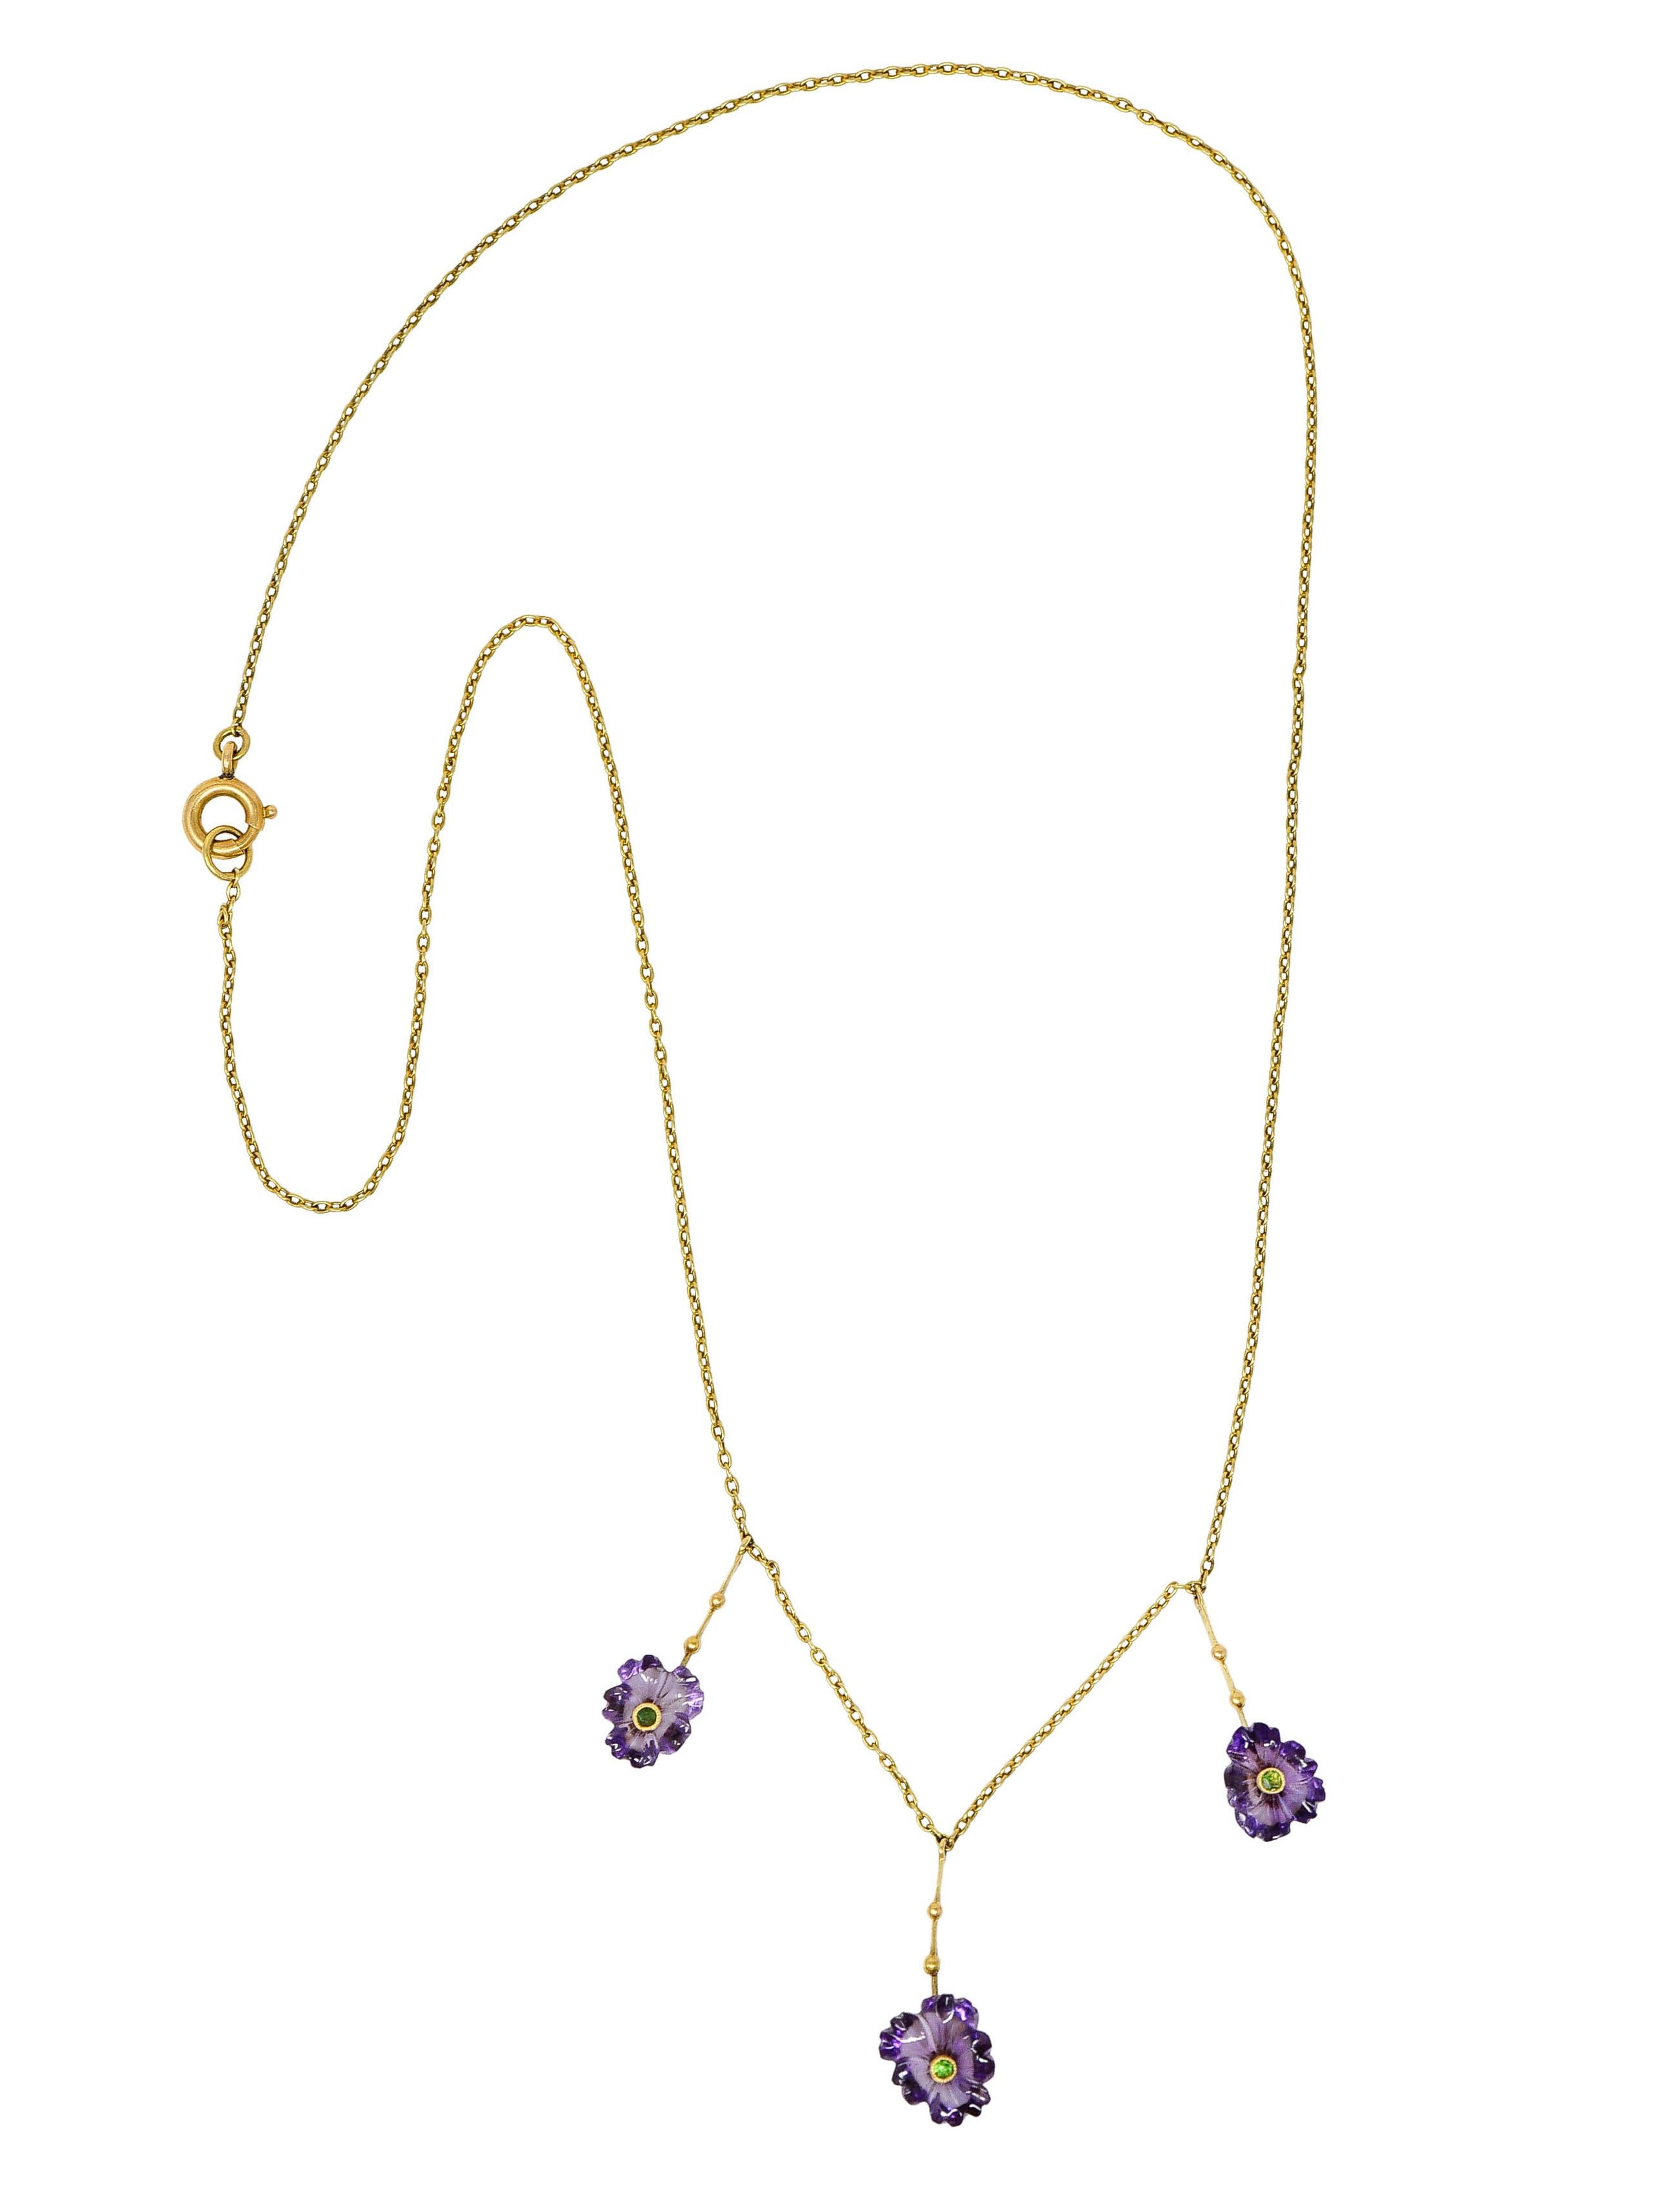 Classic cable chain necklace suspends three drops

With a bar surmounts accented by gold beading

Terminating as carved amethyst flowers - medium to medium light purple in color

Each centering a bezel set round cut demantoid garnet - bright